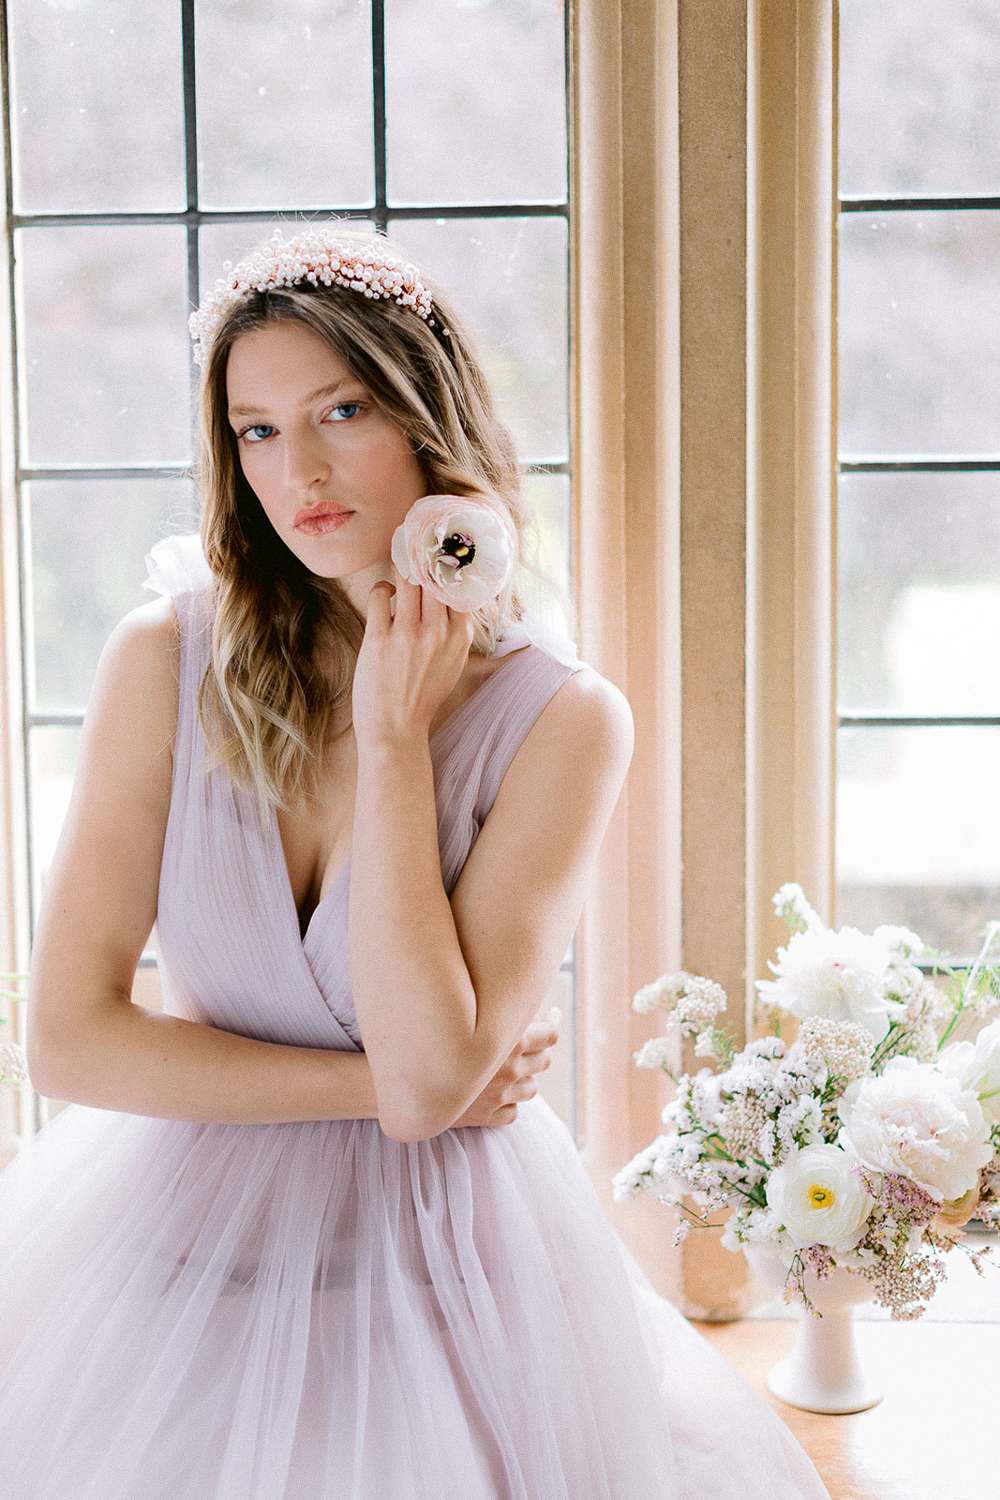 Lilac Blush Fairytale Bridesmaid Gown of Model in Window of Bedroom